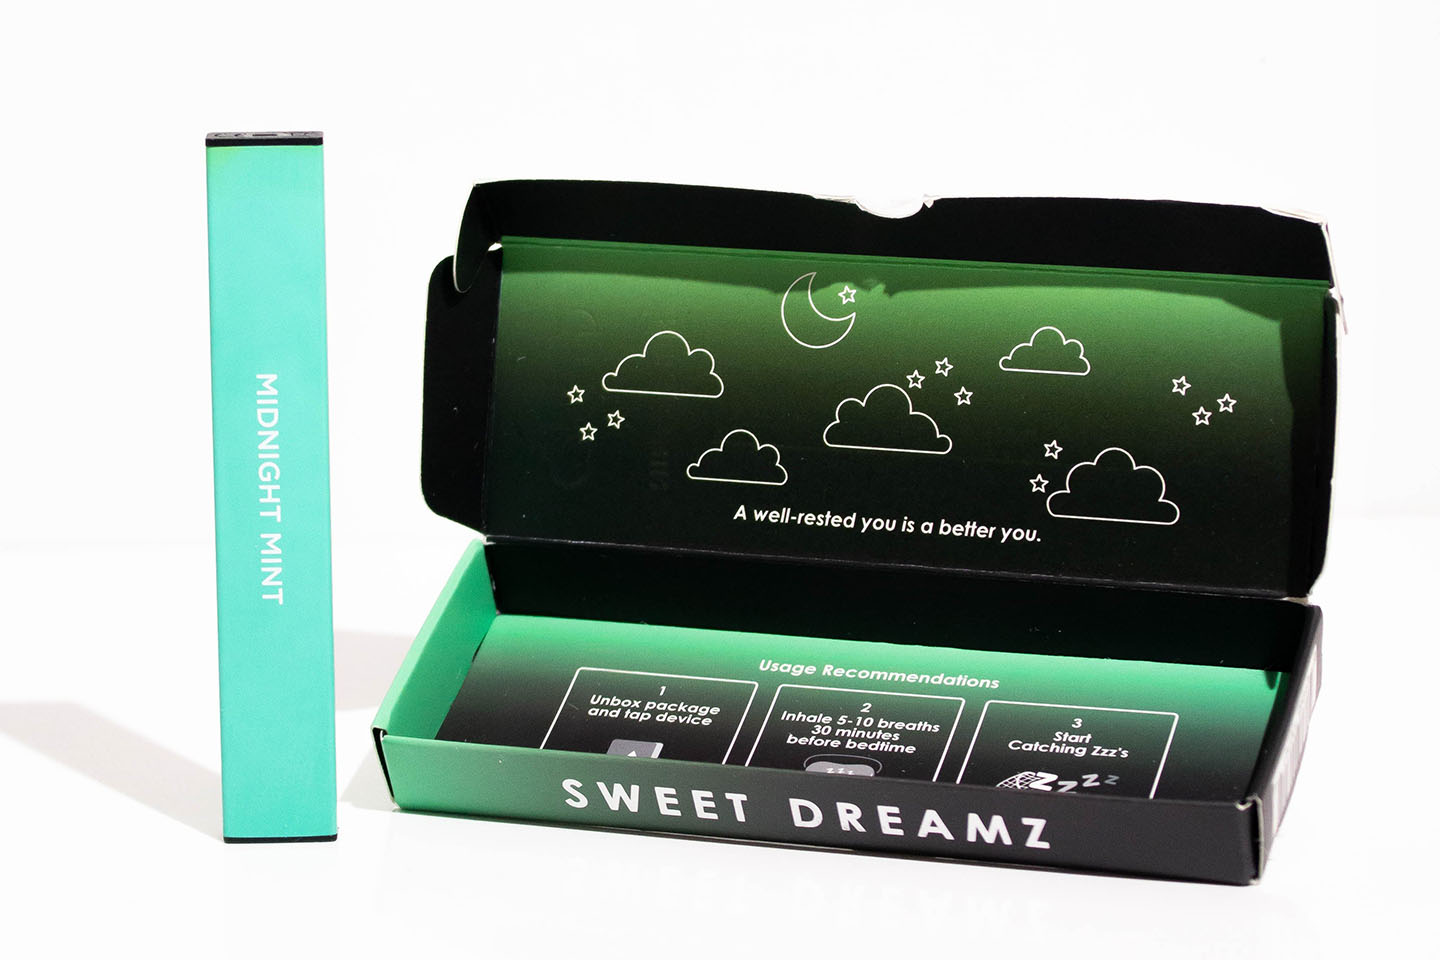 An opened box of MELO Air Melatonin Diffuser in Midnight Mint flavor showing printed usage recommendations